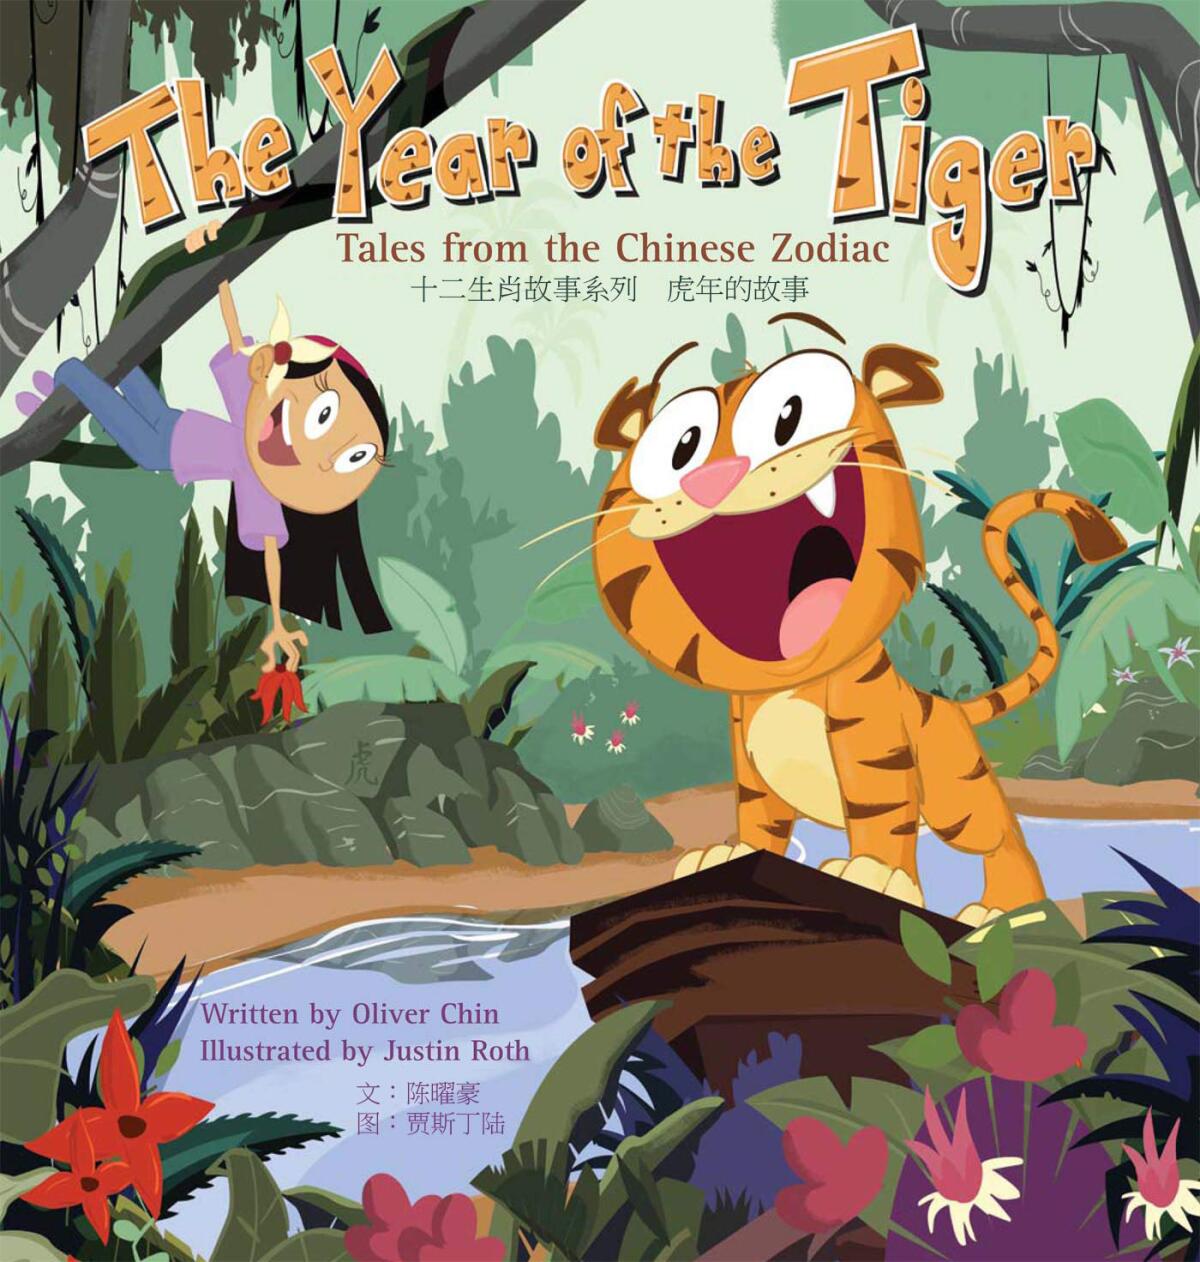 Portada del libro "The Year of the Tiger: Tales of the Chinese Zodiac".